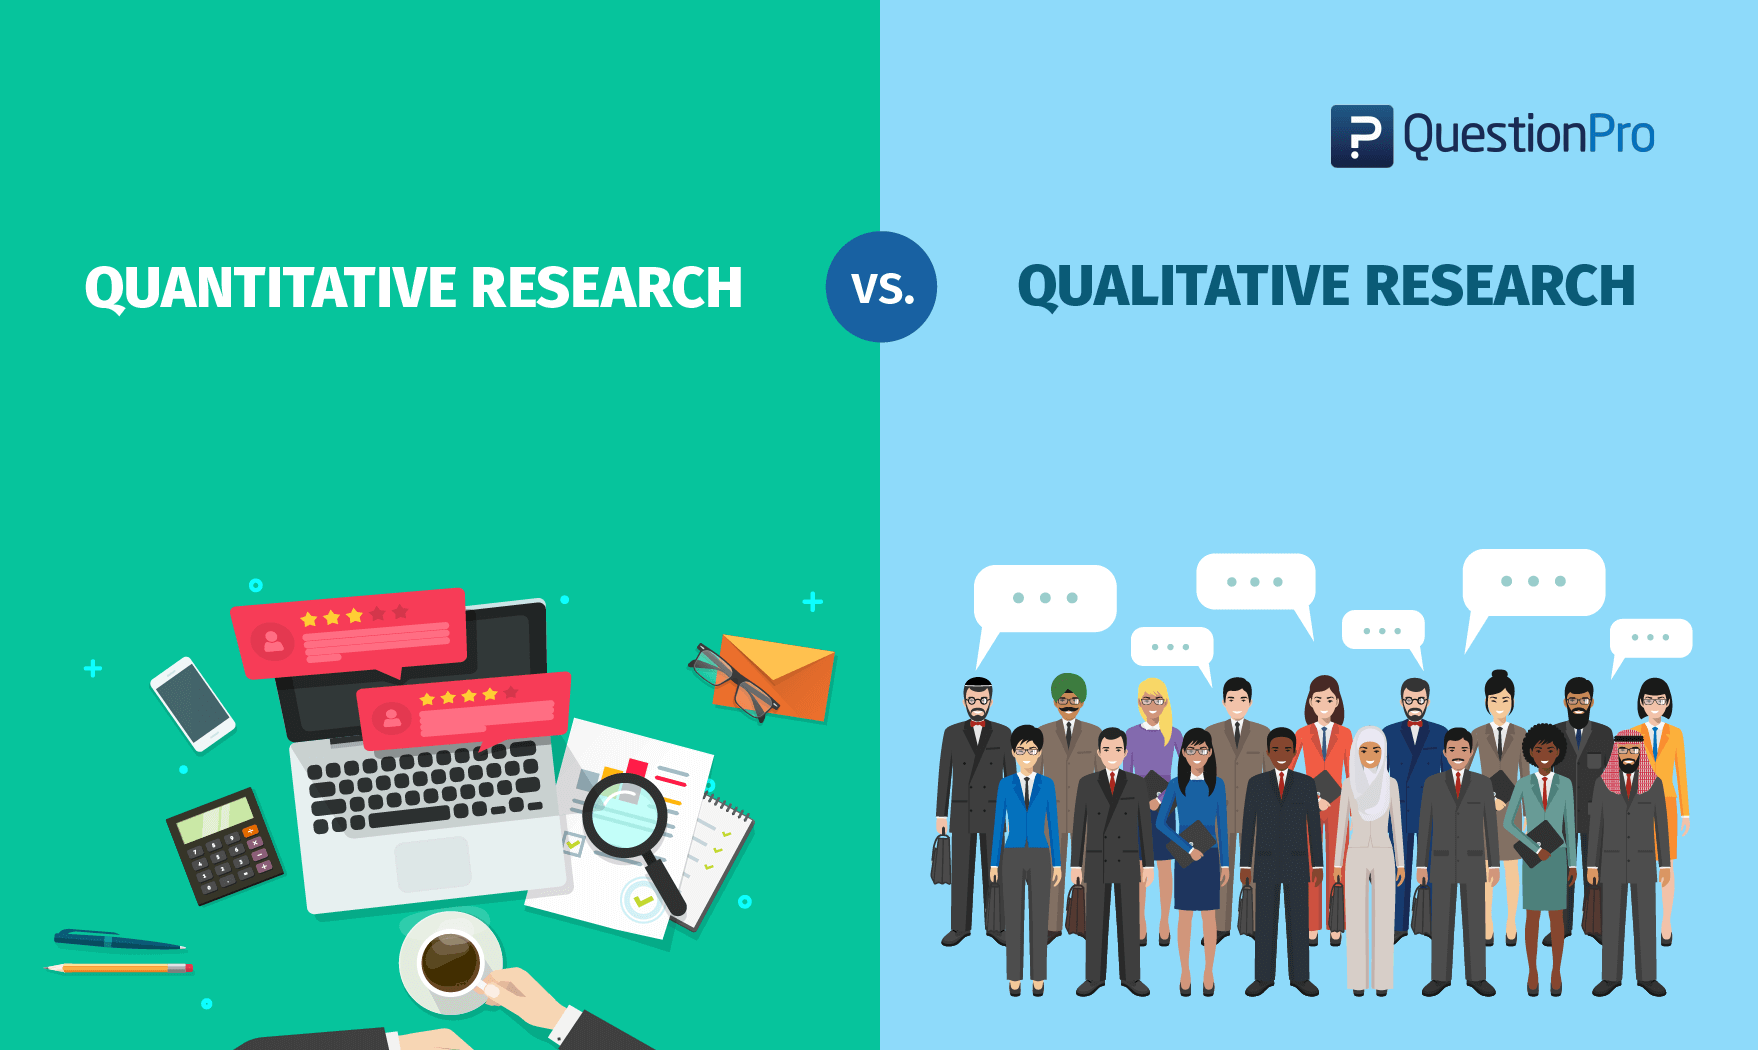 are qualitative and quantitative research methods complementary